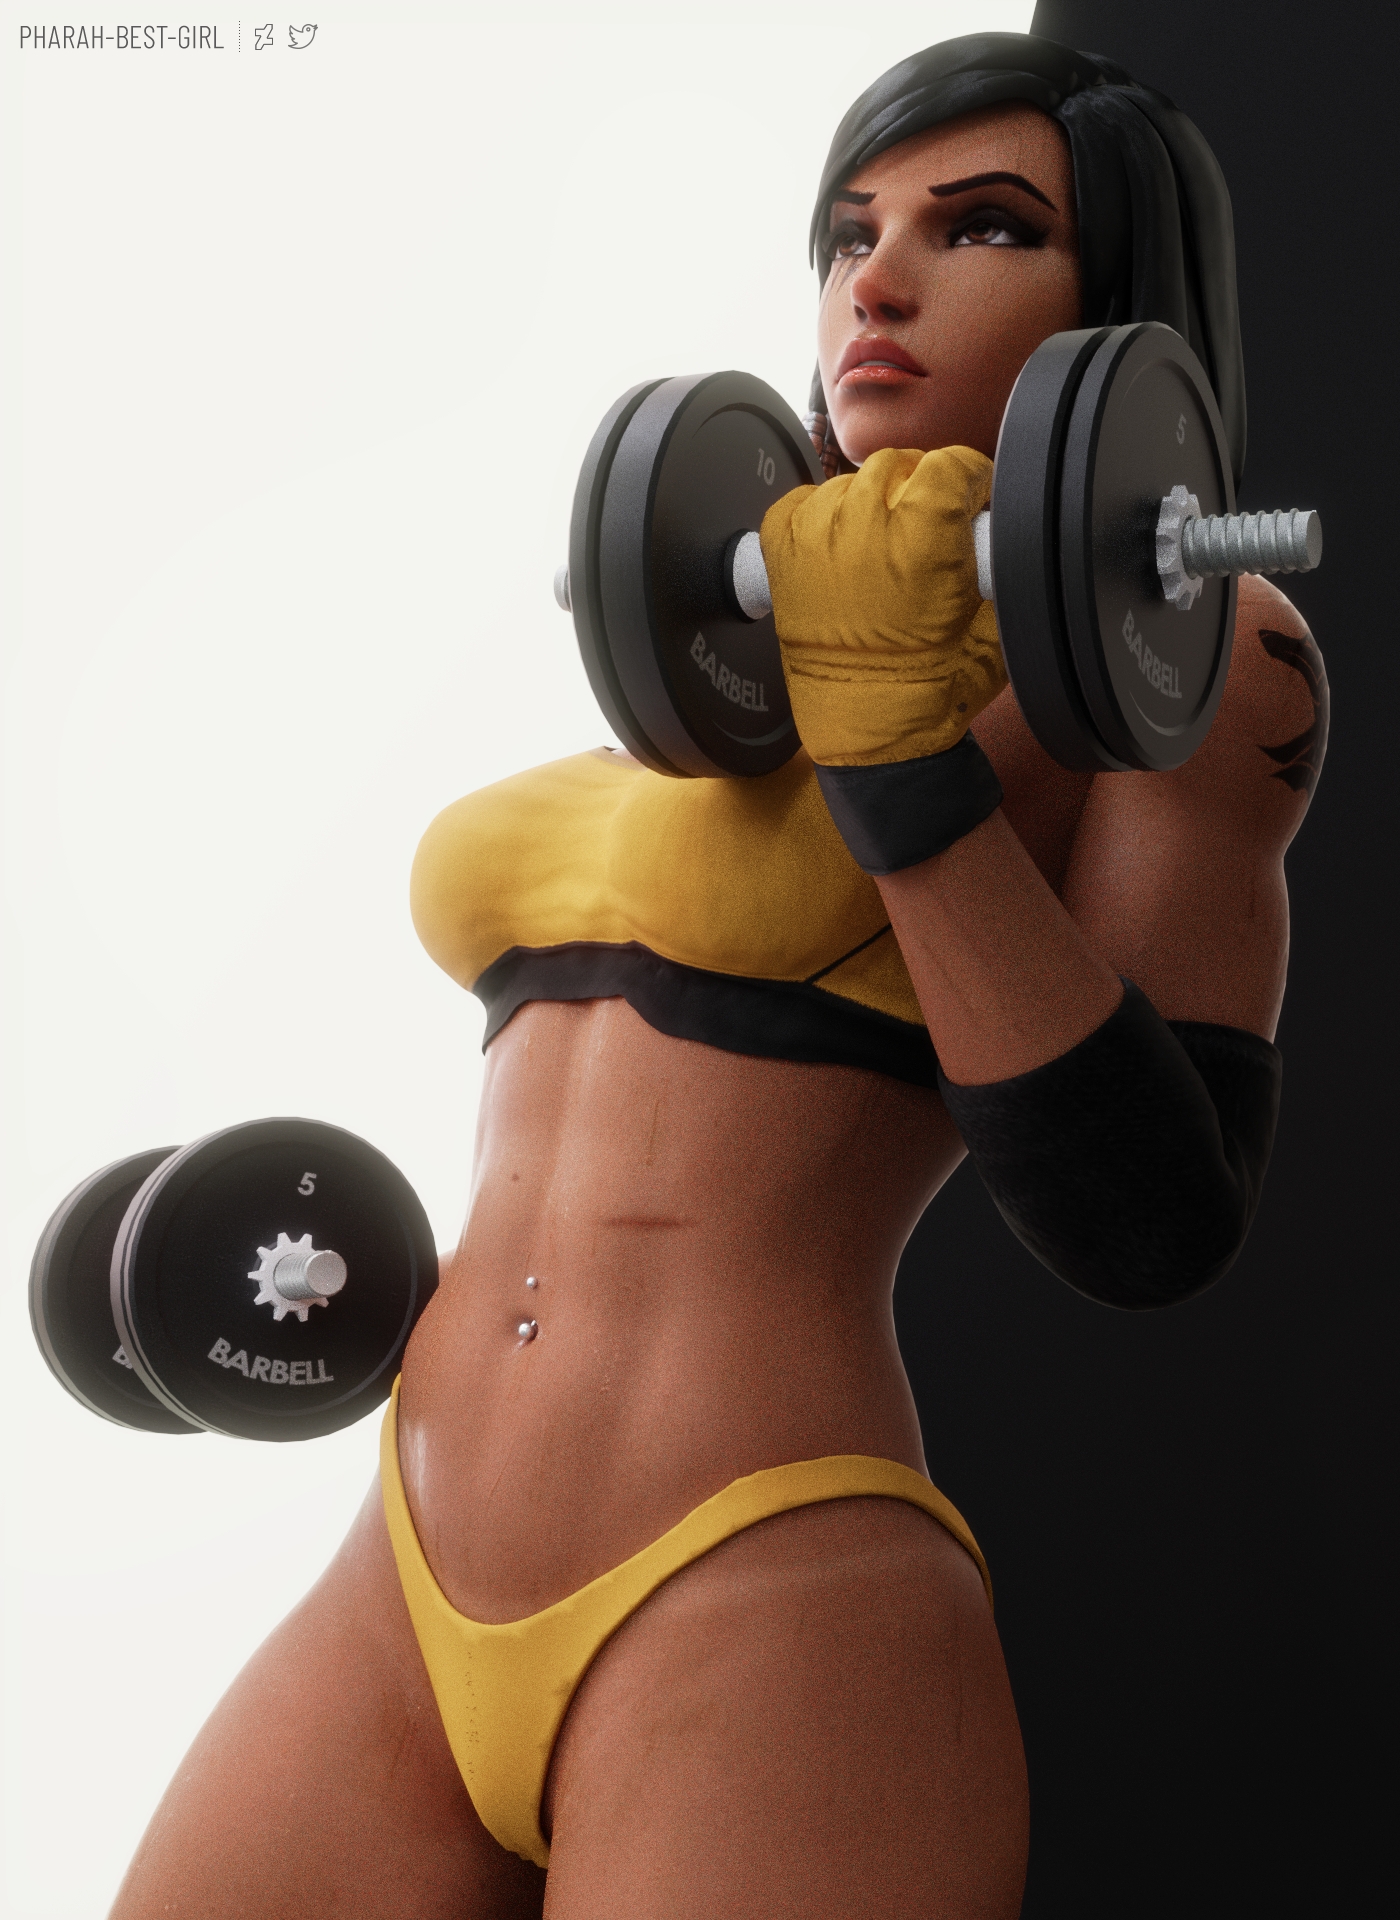 Workout bitch Pharah Overwatch 3d Porn Sexy Nude Naked Natural Boobs Natural Tits Hairy Pussy Pubic Hair Gym Muscular Girl 2